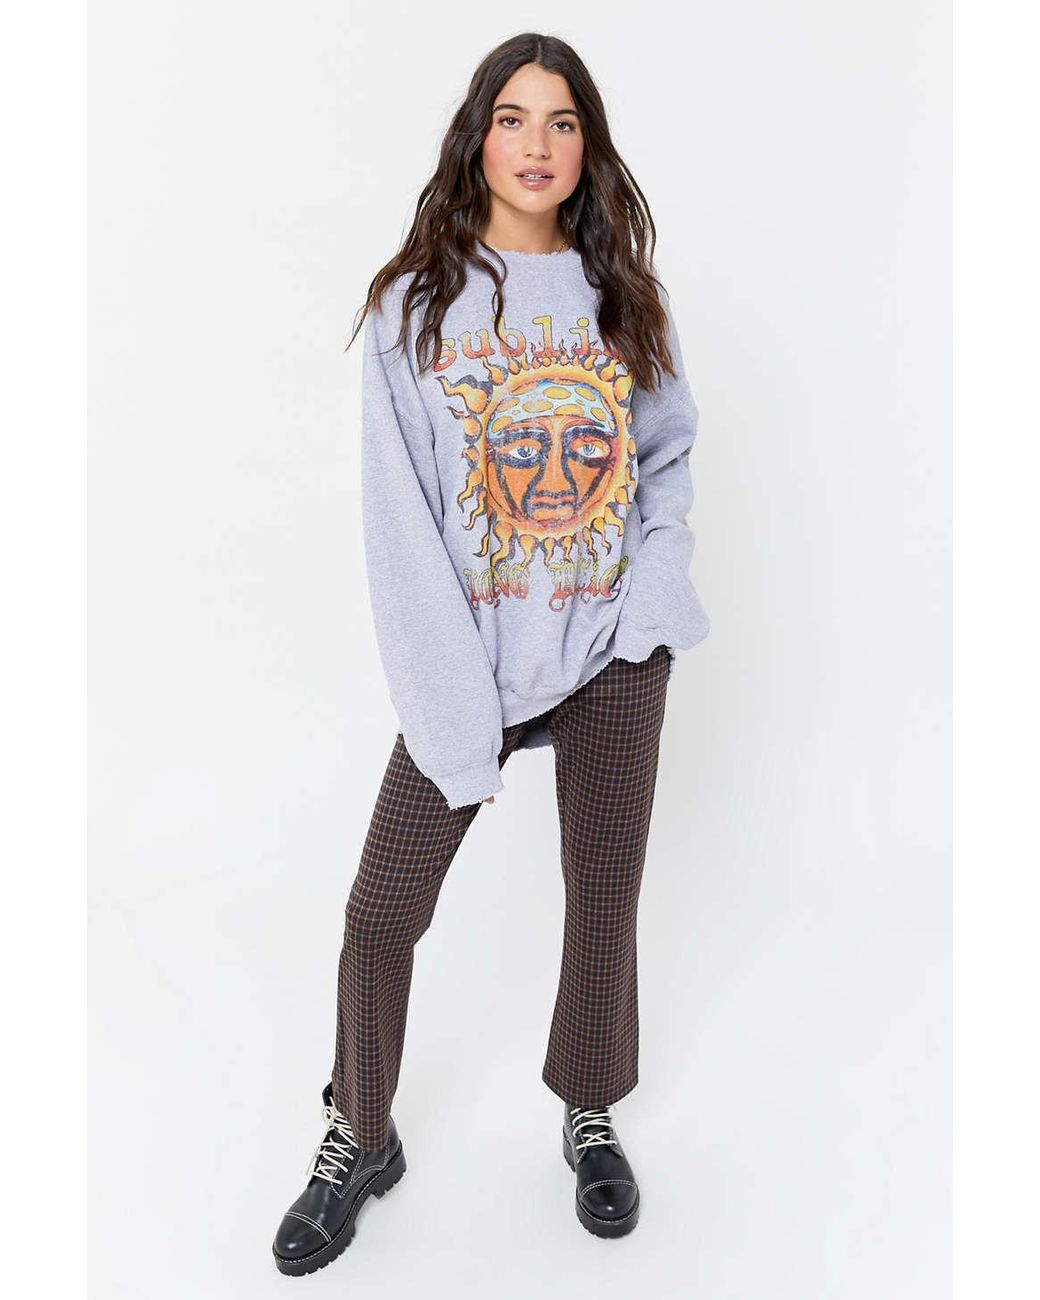 Urban Outfitters Sublime Sun Oversized Crew Neck Sweatshirt | Lyst